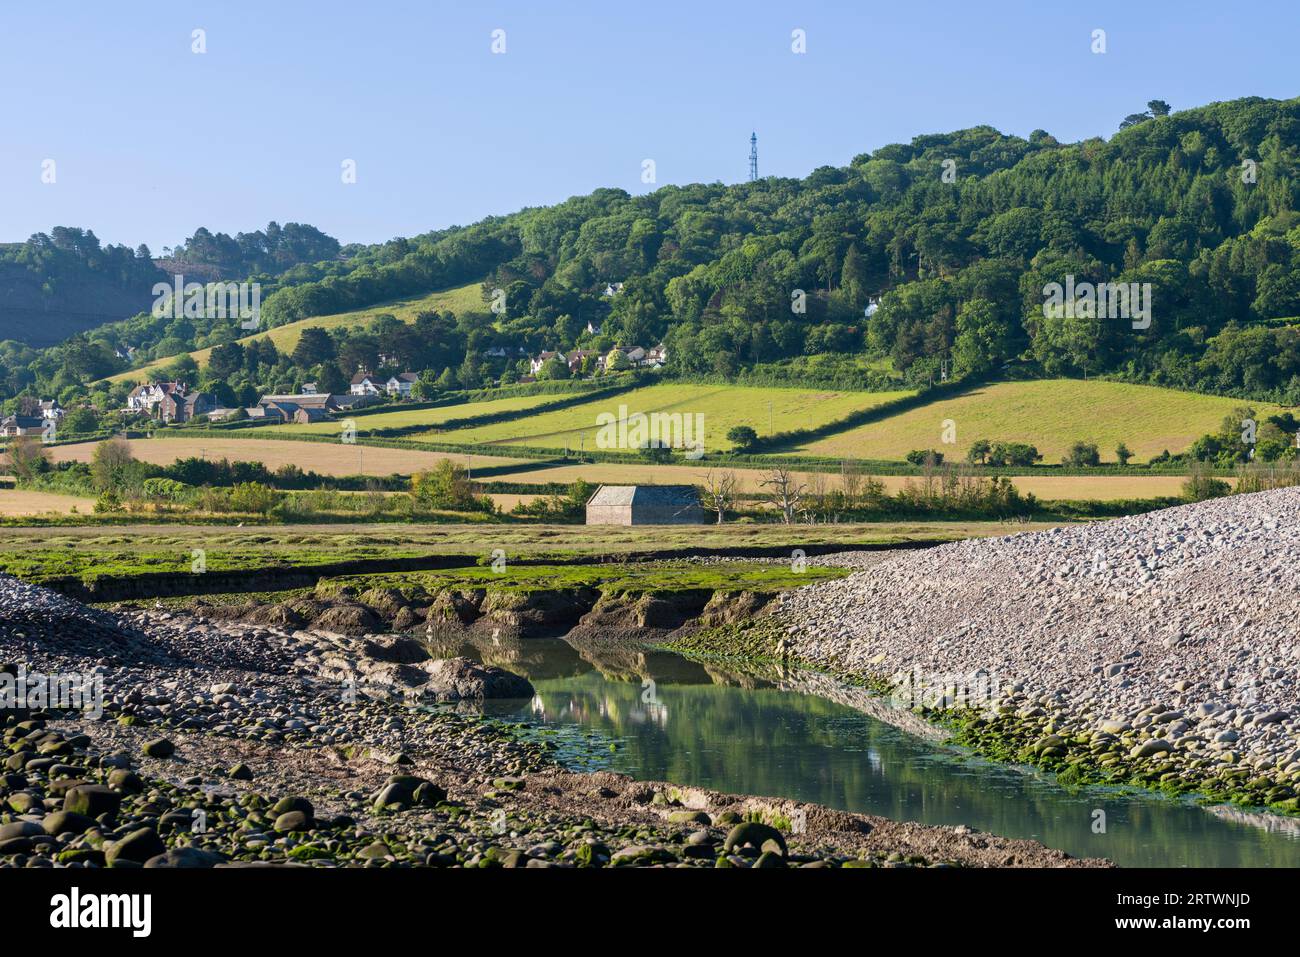 The Breach in the pebble ridge along Porlock Bay which has led to the transformation of the Porlock Marsh into a salt marsh, Exmoor National Park, Somerset, England. Stock Photo